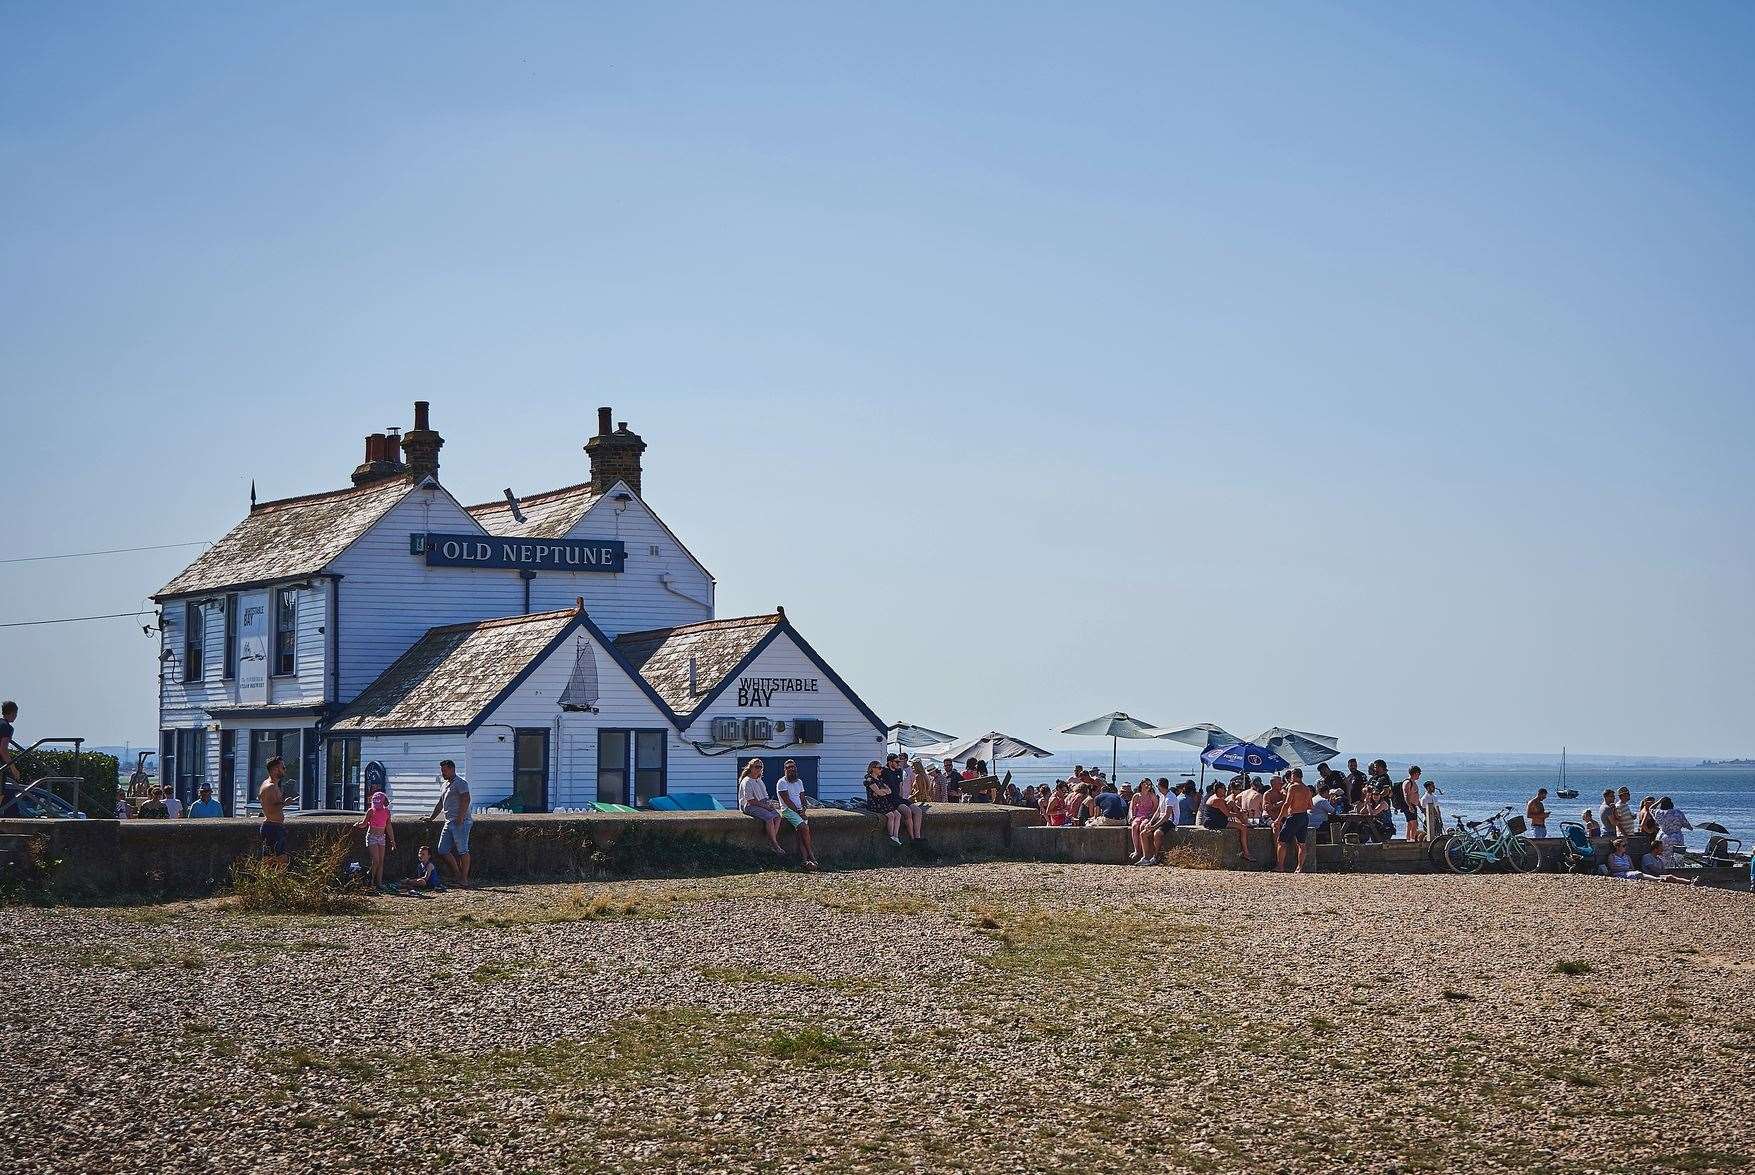 Whitstable is still a honey-pot for tourists...but just try living there in the summer